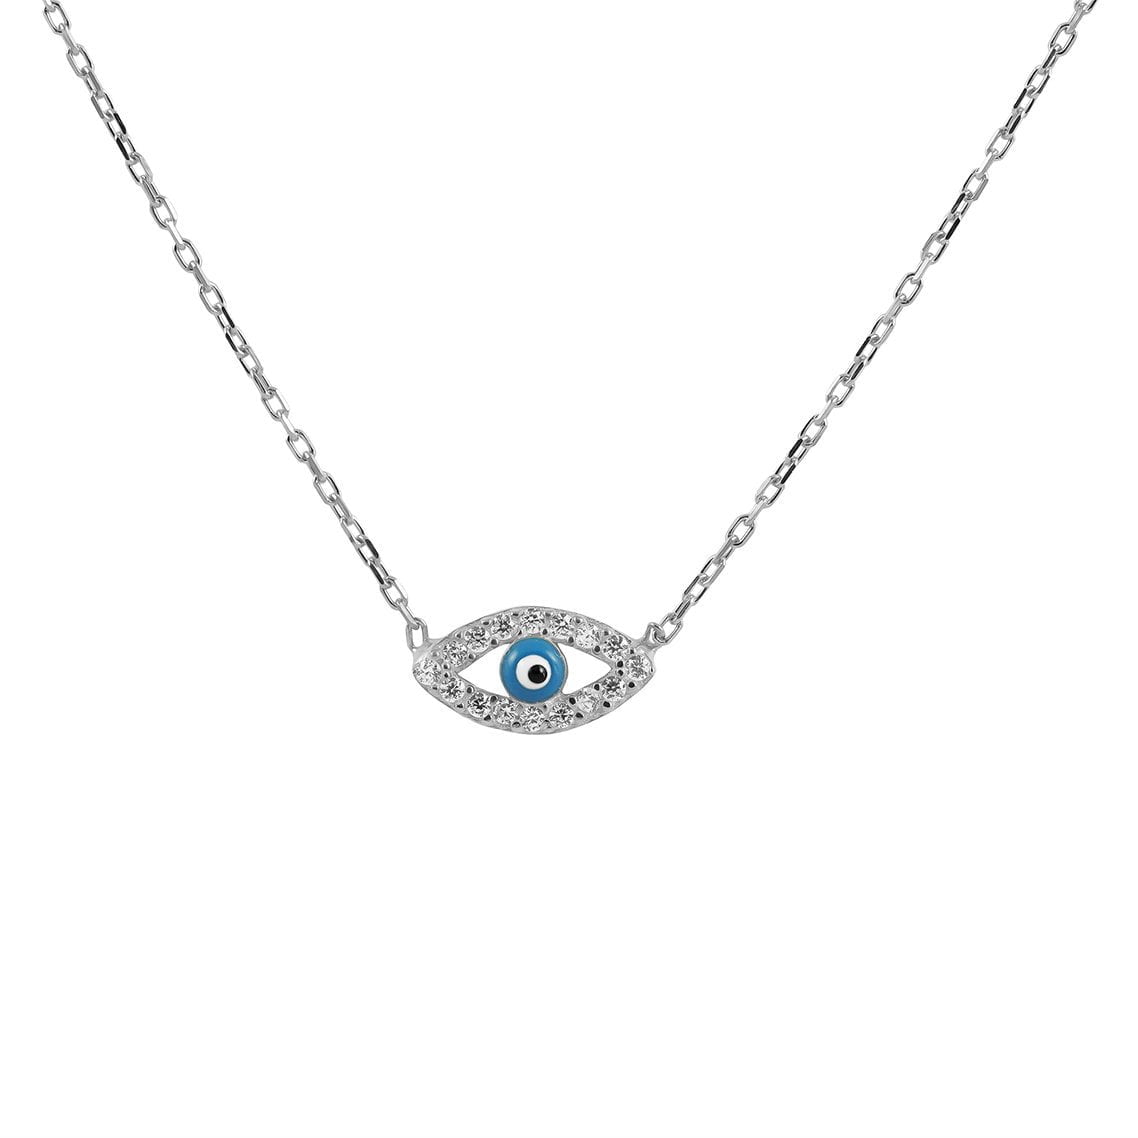 Duo Jewellery Necklaces Rose Gold Duo Evil Eye Shape Necklace